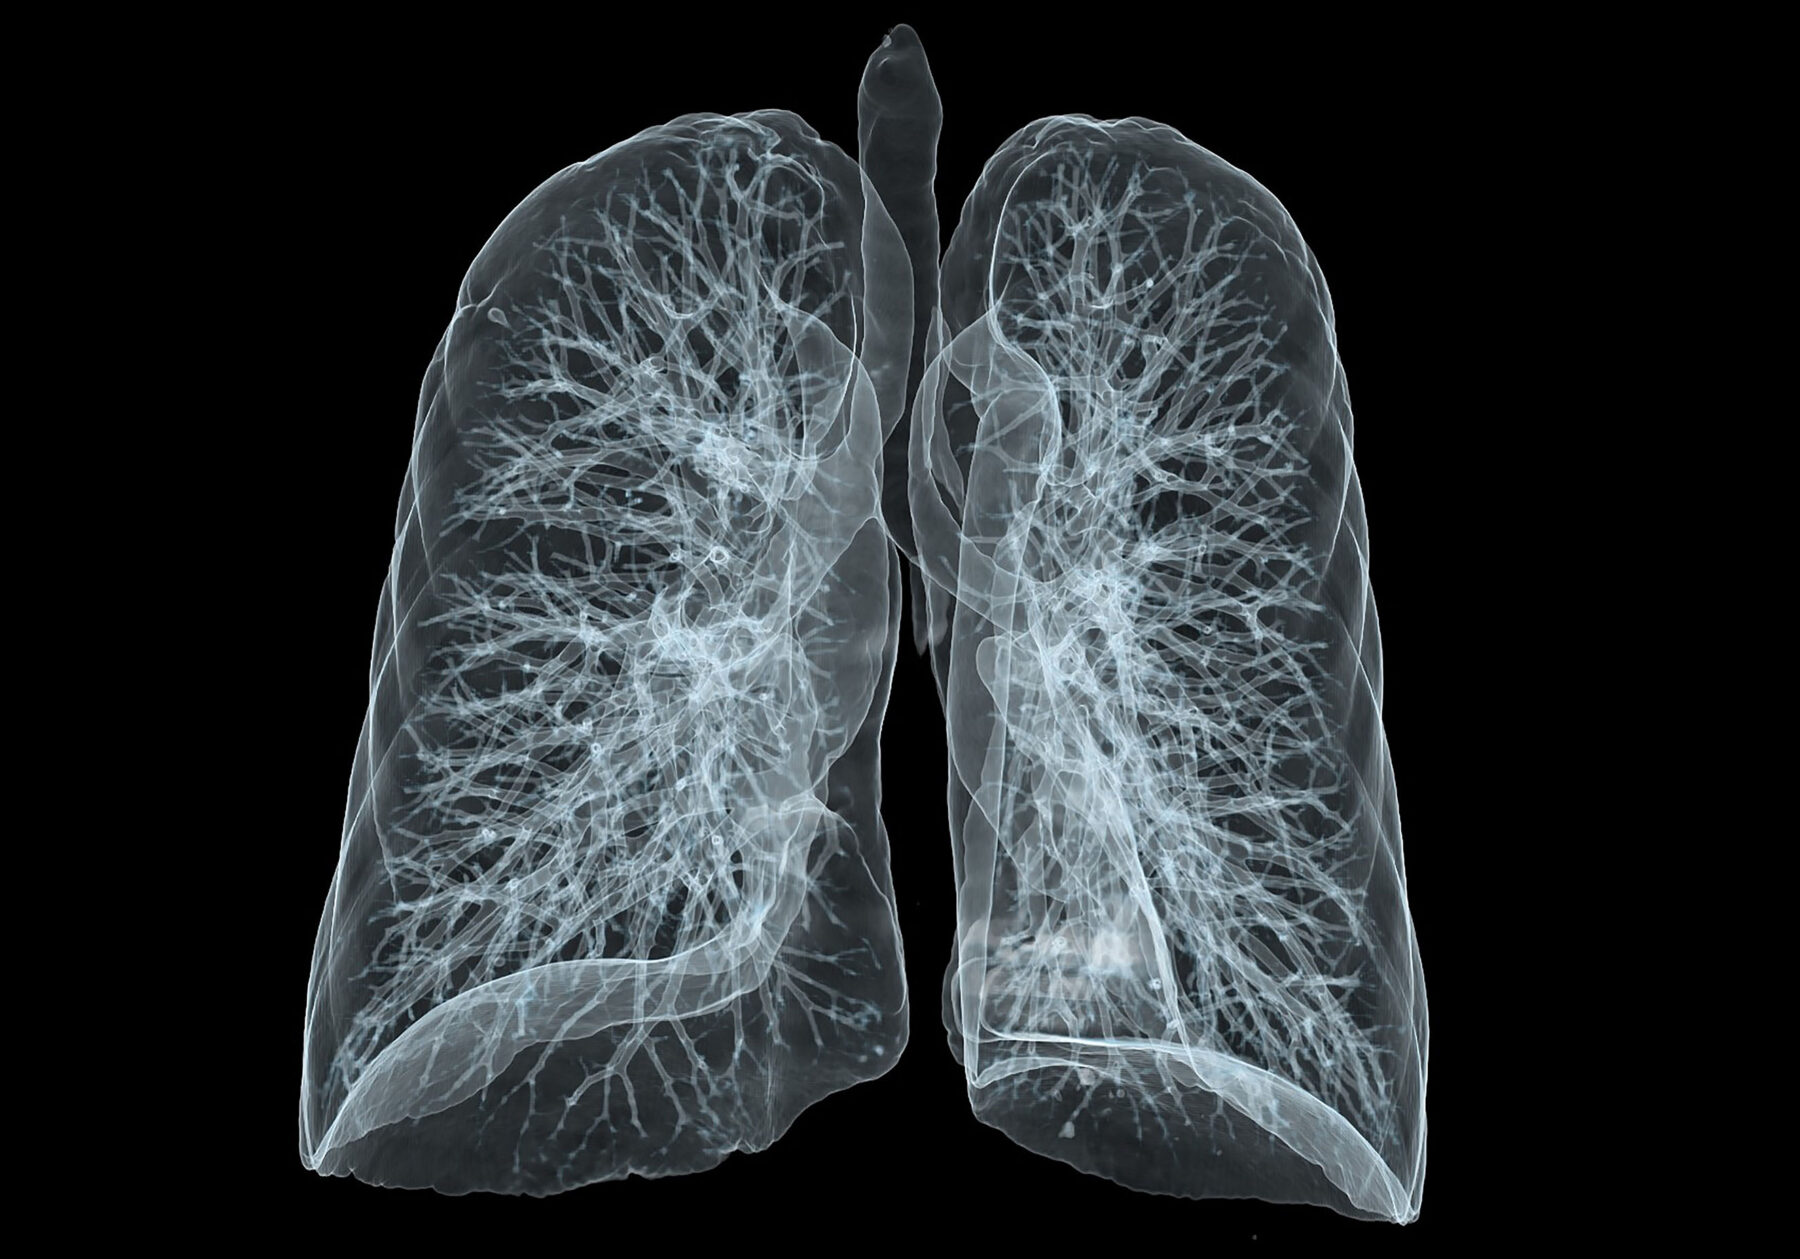 A CT scan of someone's lungs